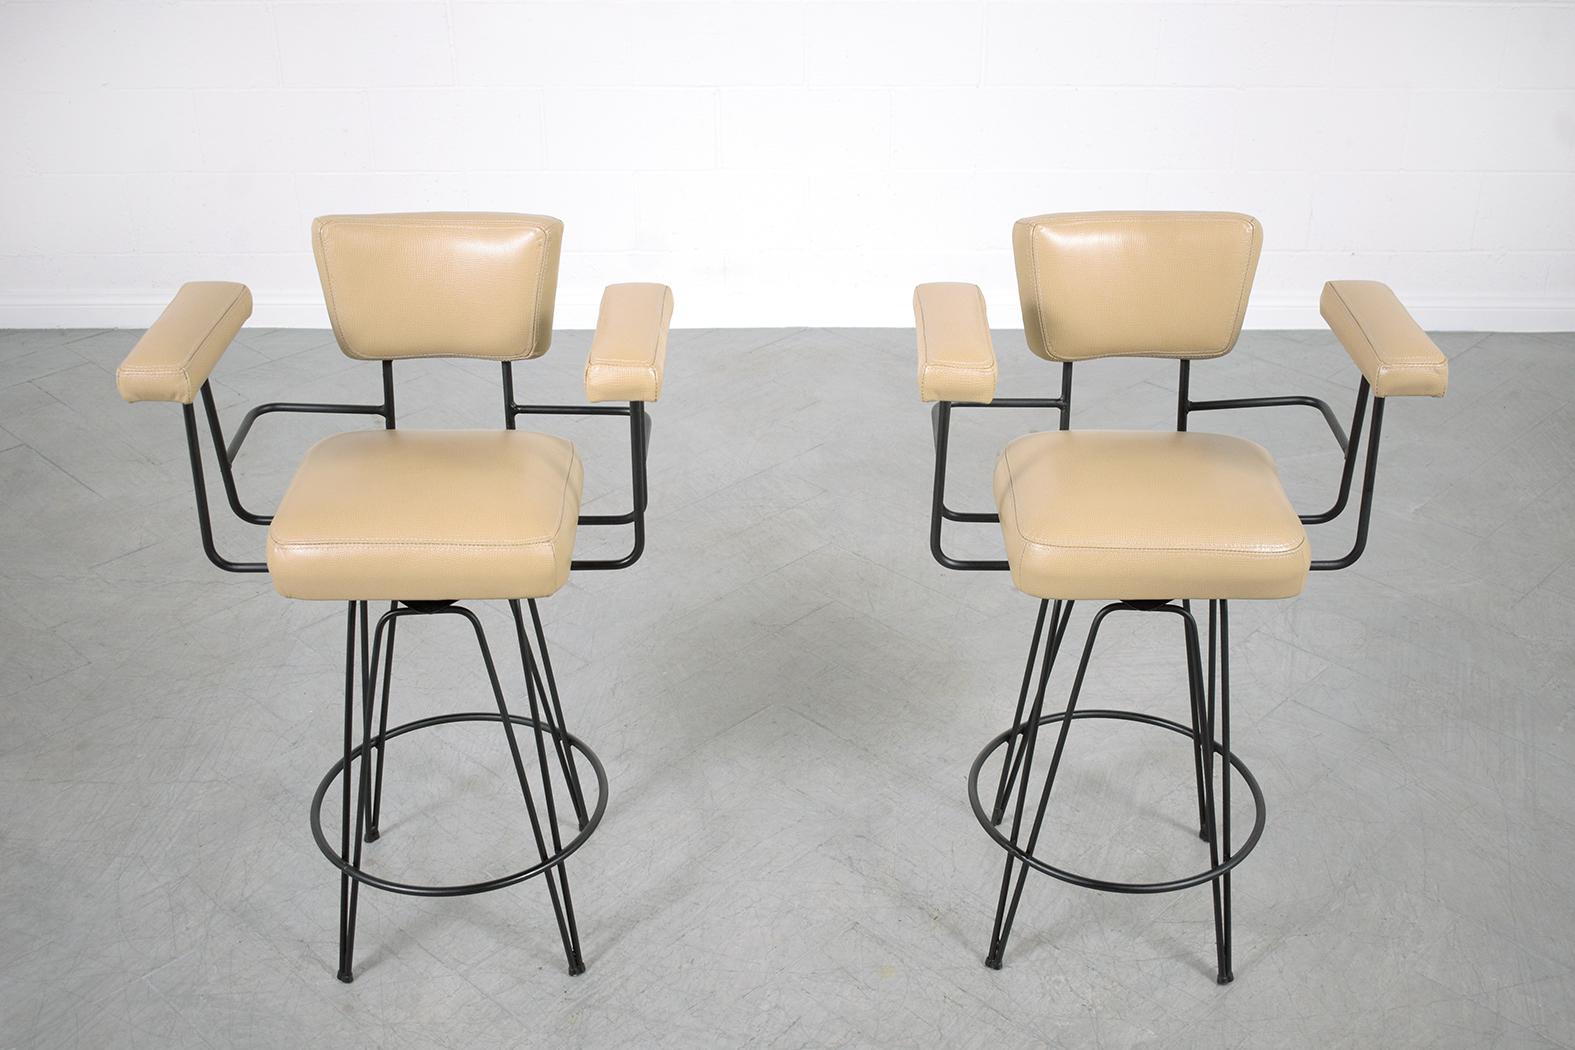 Patinated Restored 1970s Mid-Century Modern Swivel Barstools in Beige Leather For Sale